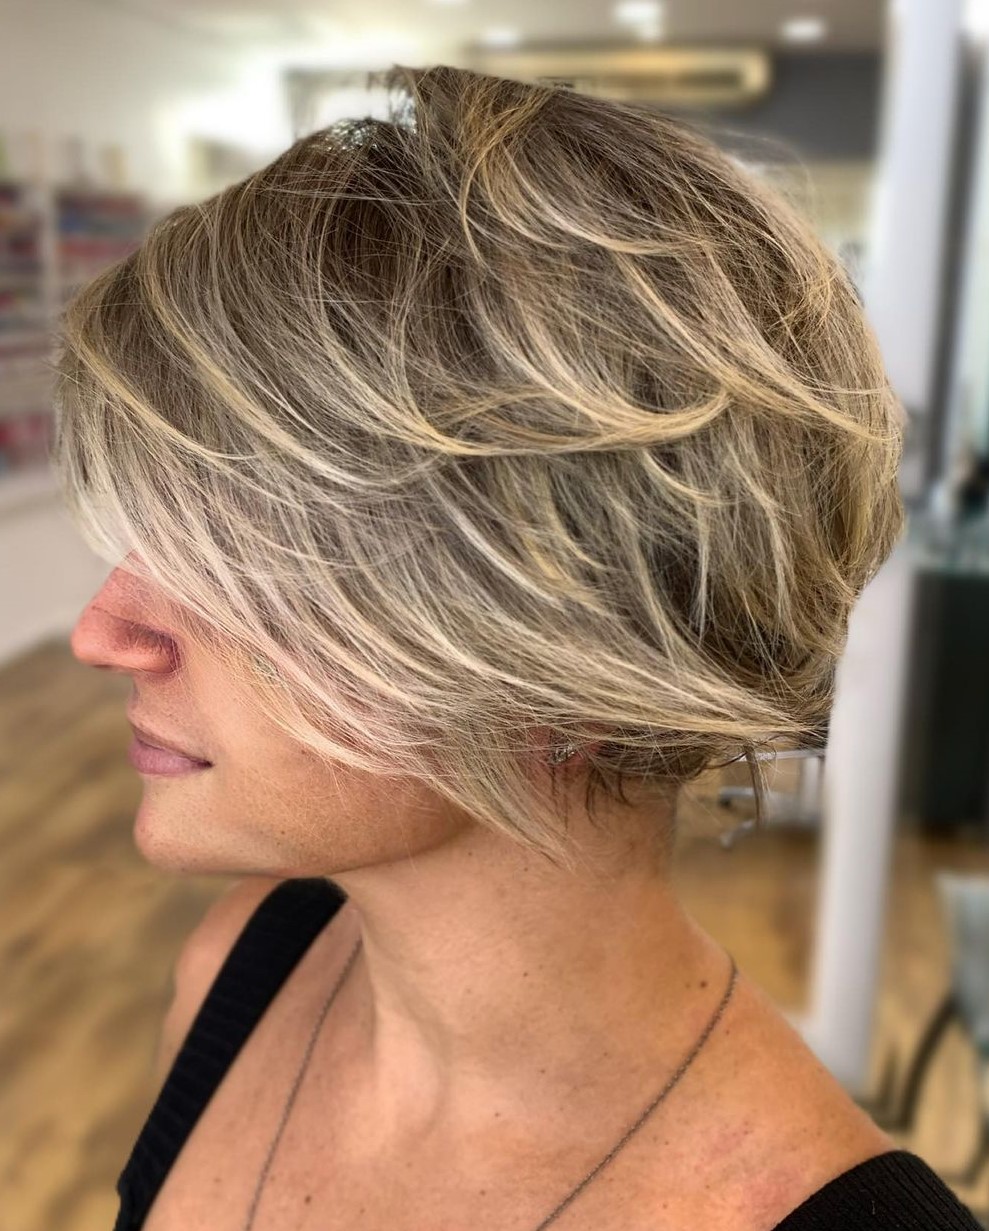 Feathered Messy Hair with Highlights